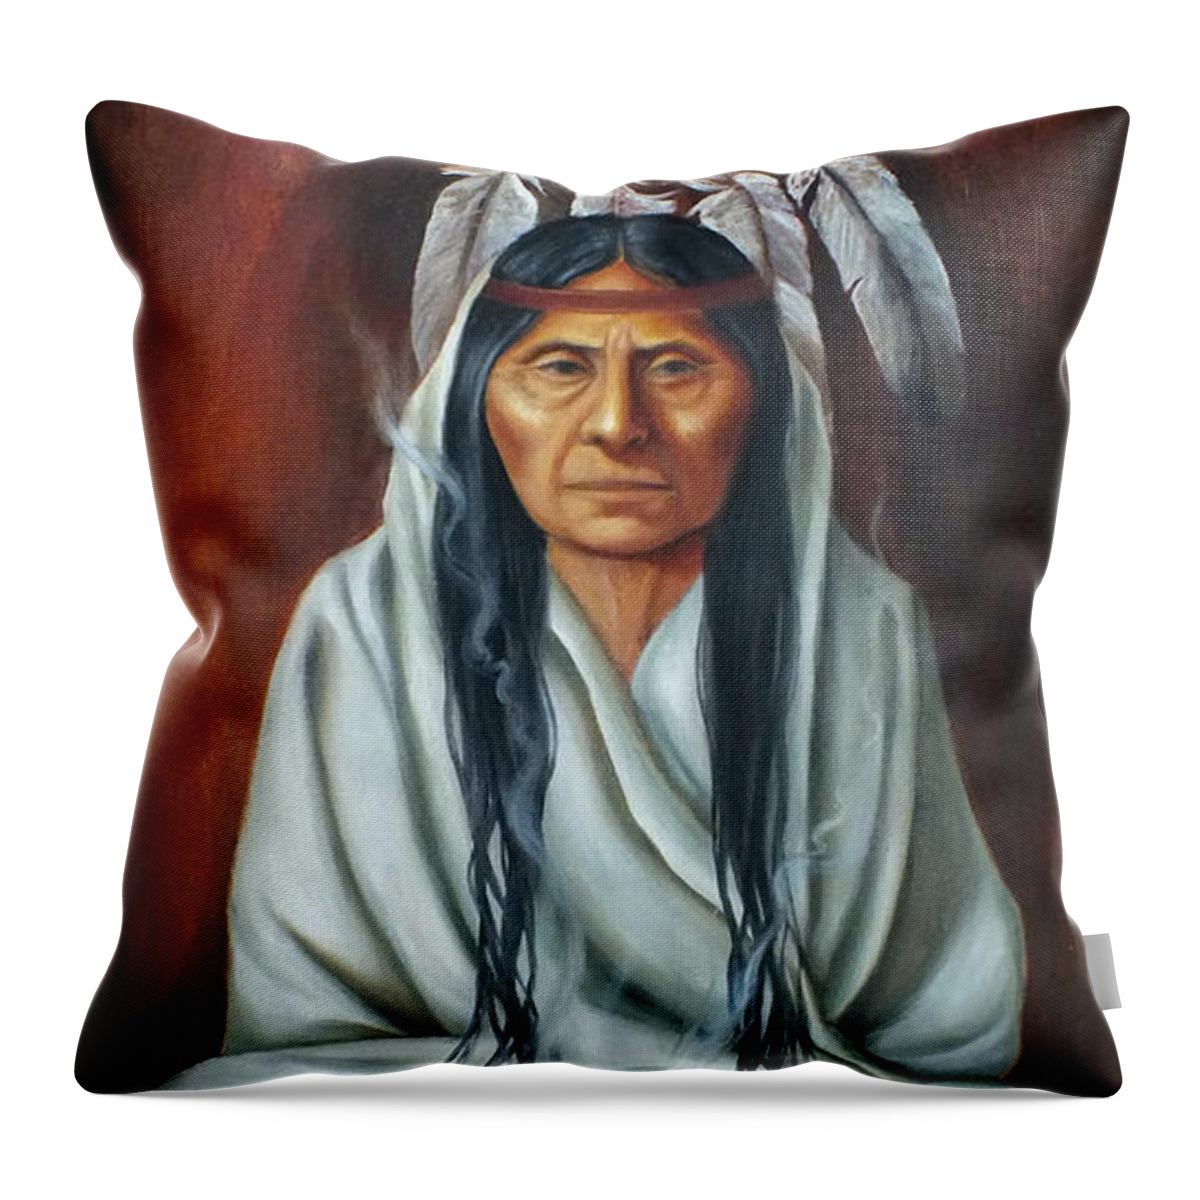 Native American Throw Pillow featuring the painting The elder by Alejandra Baiz